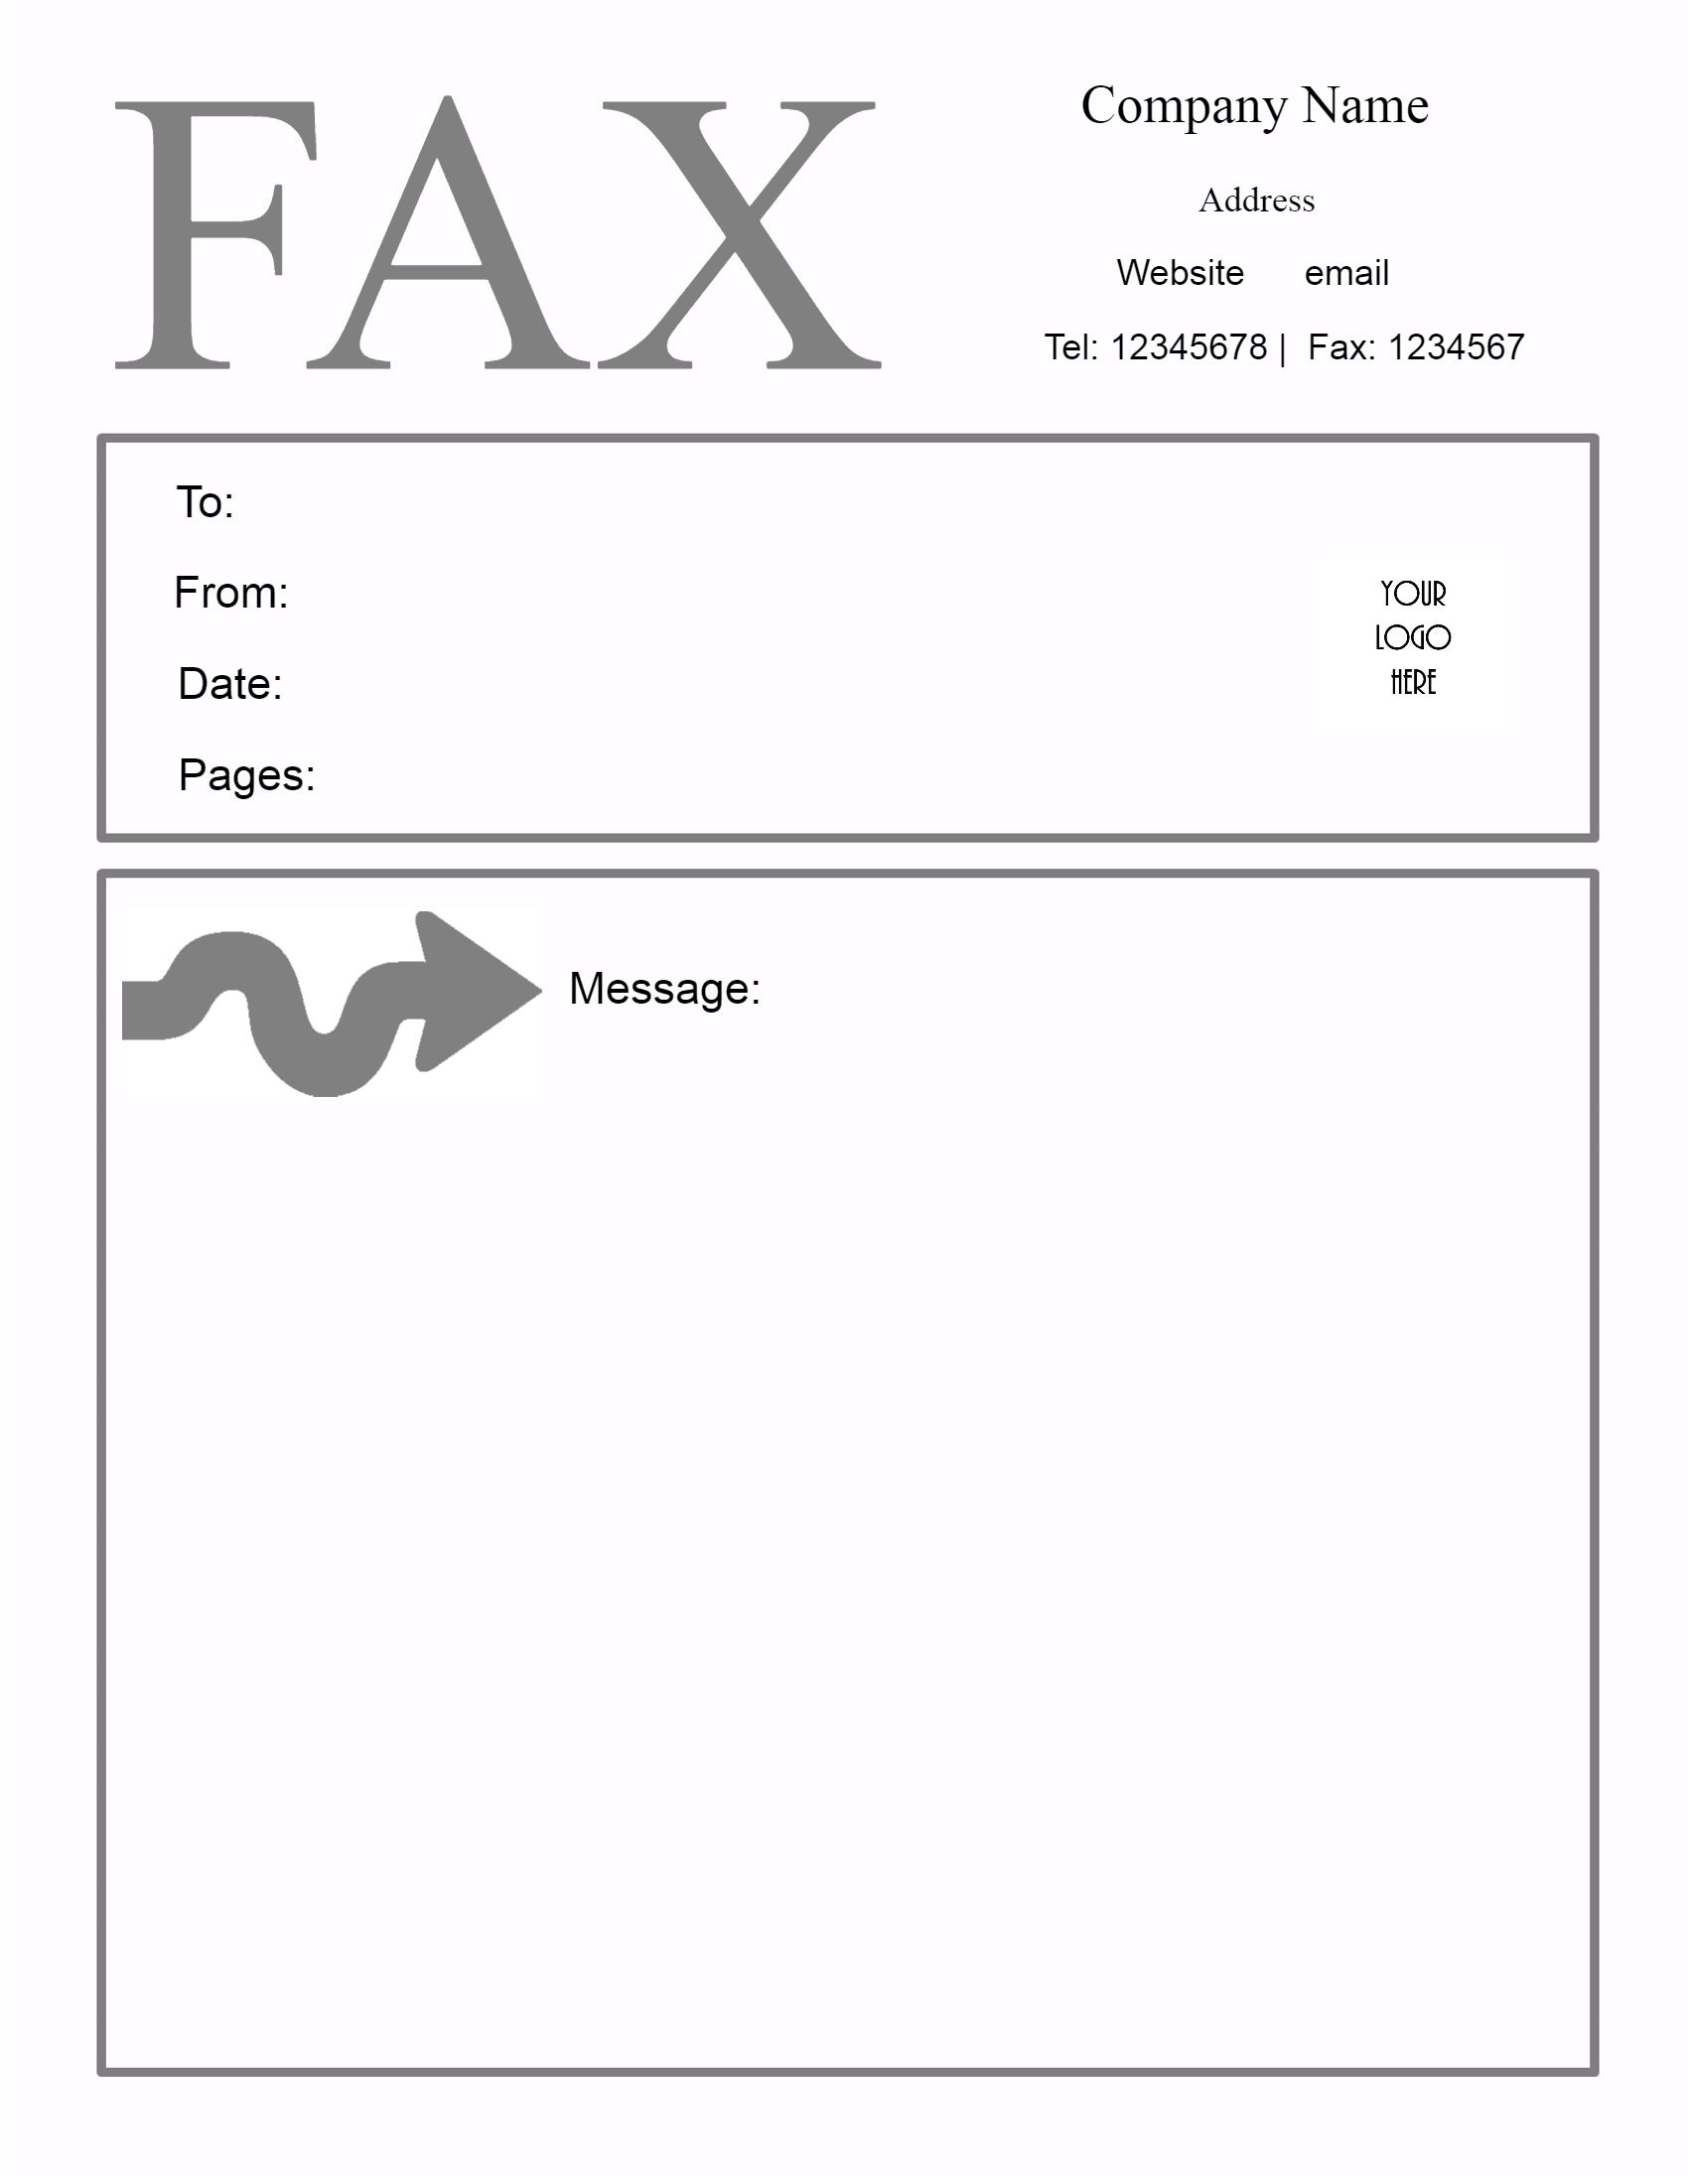 Free Fax Cover Sheet Template | Customize Online Then Print - Free Printable Cover Letter For Fax